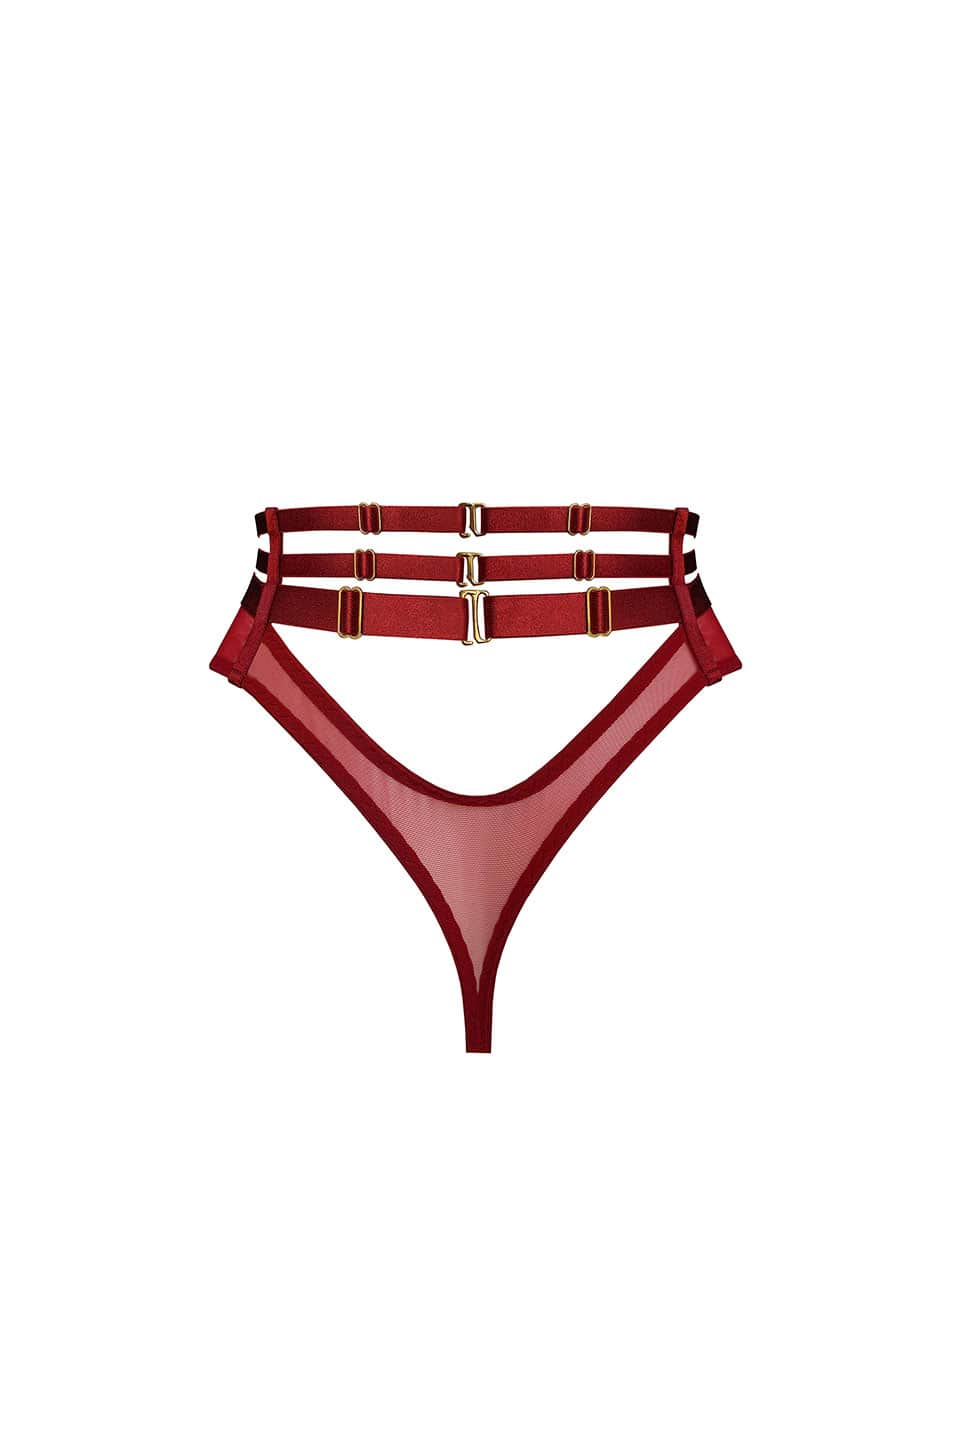 Designer Burnt Red Undergarments, shop online with free delivery in UAE. Product gallery 2